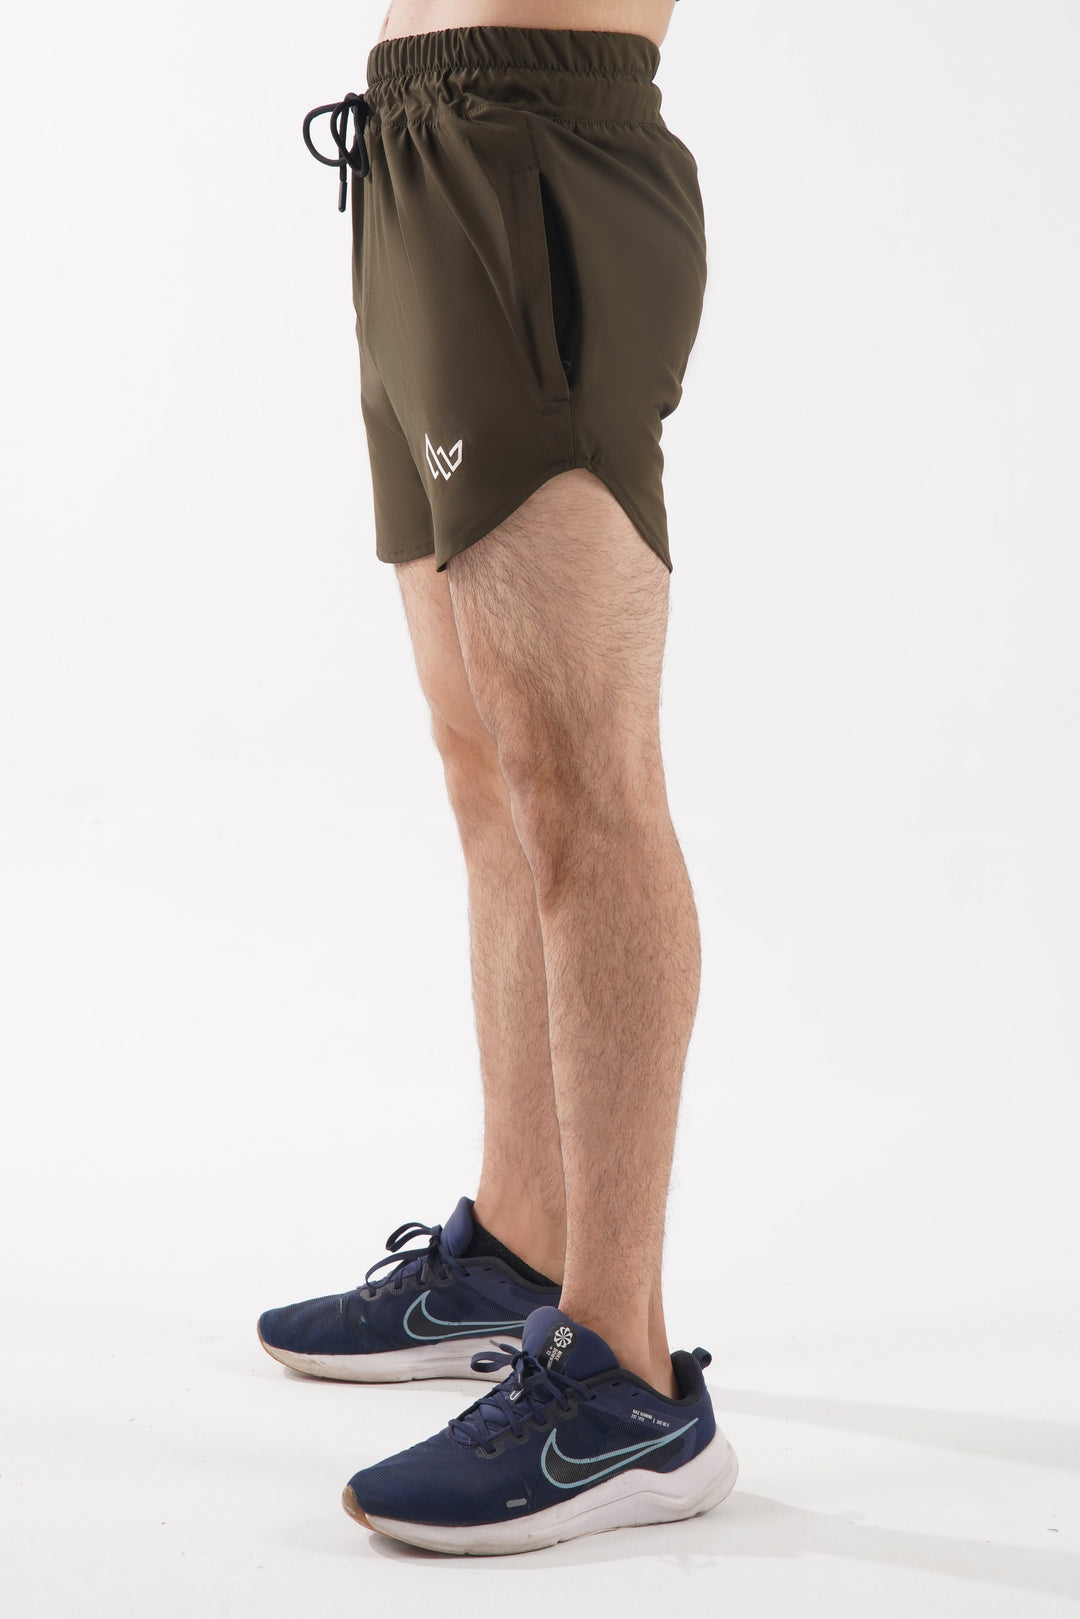 QuickFit Training Shorts - Olive